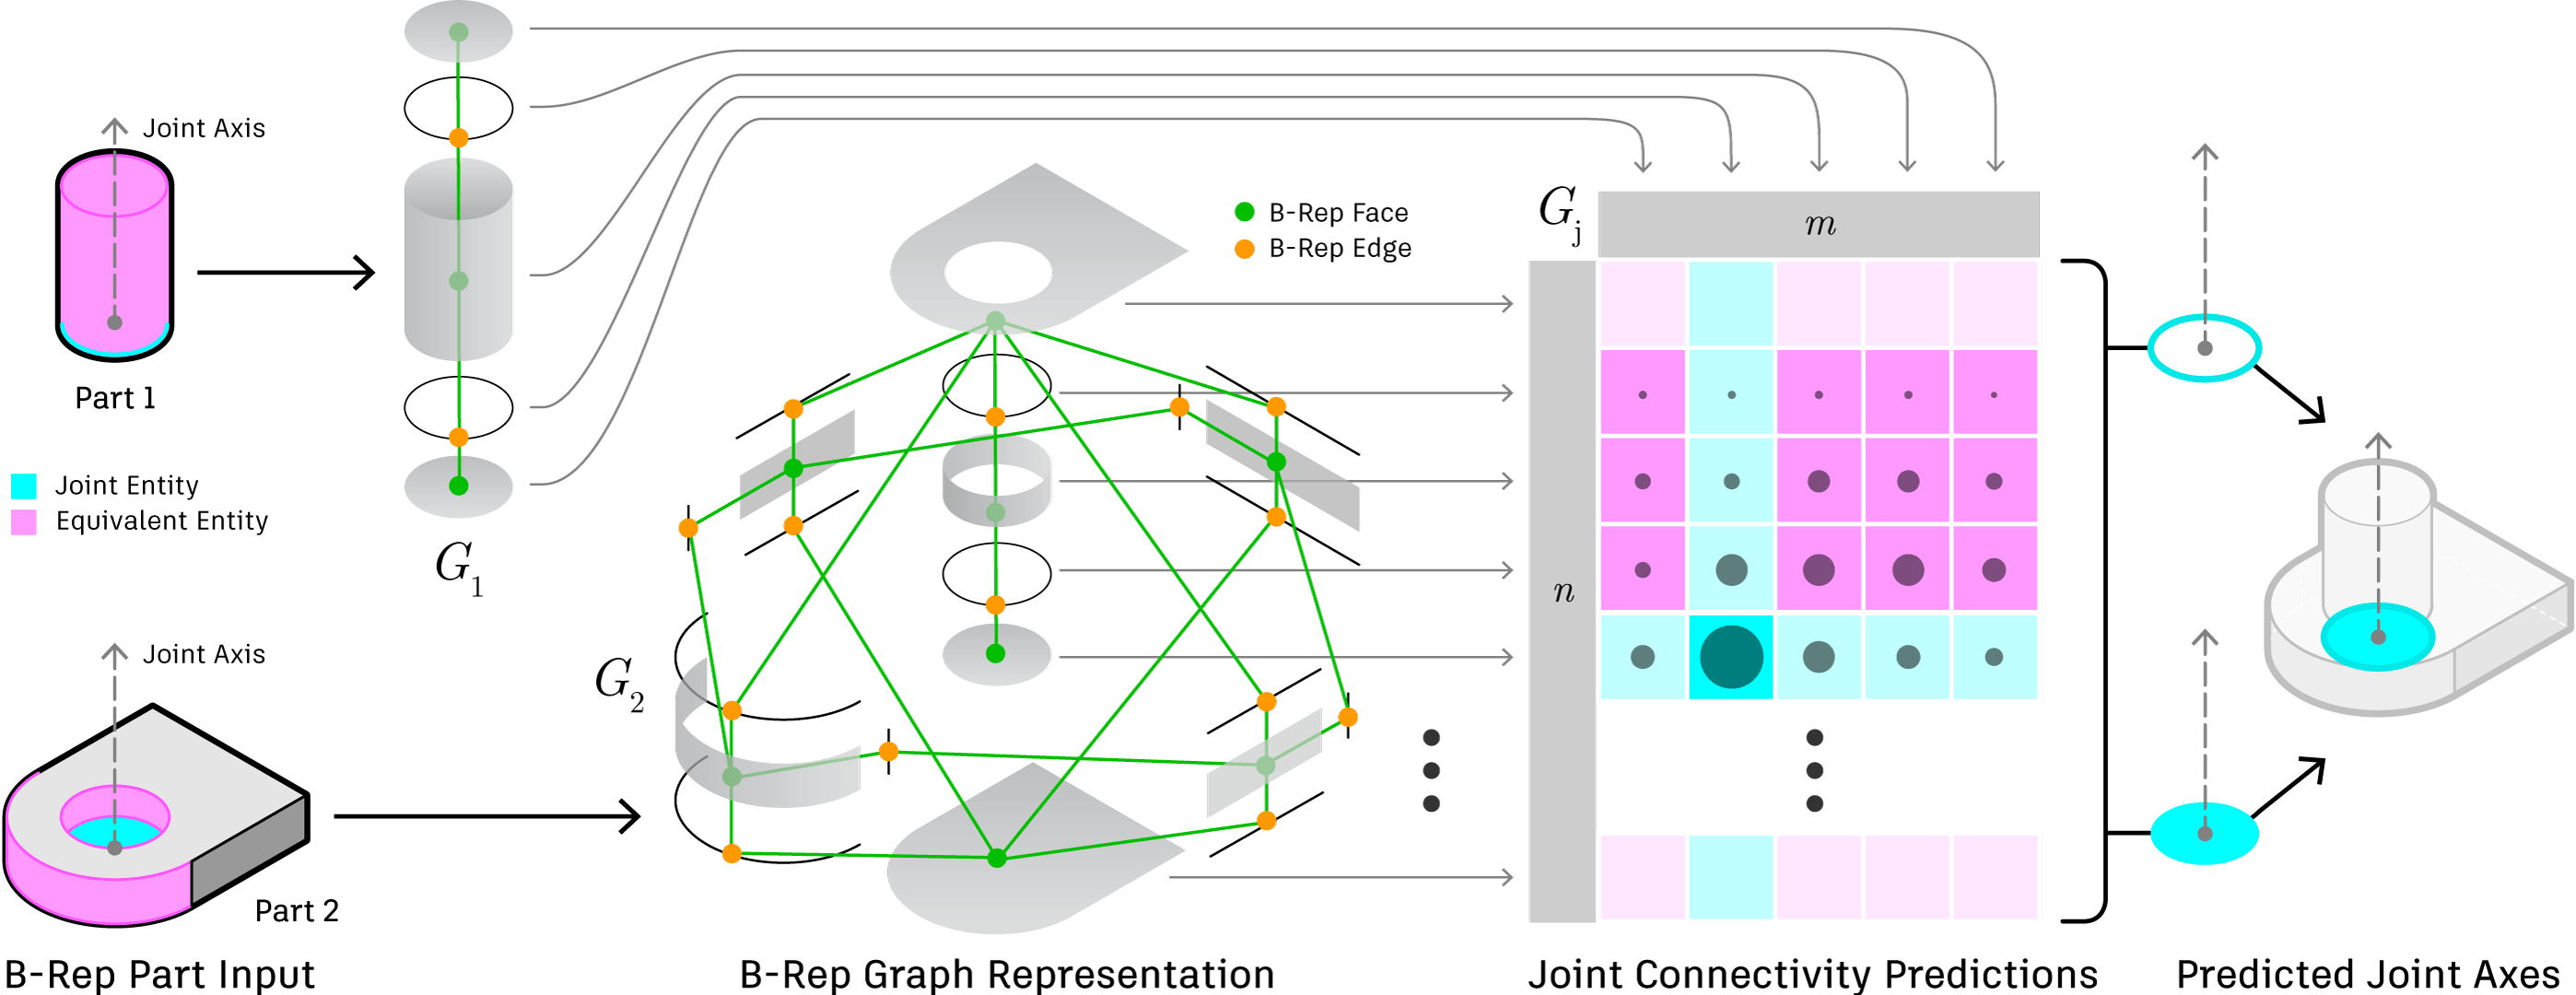 JoinABLe Representation